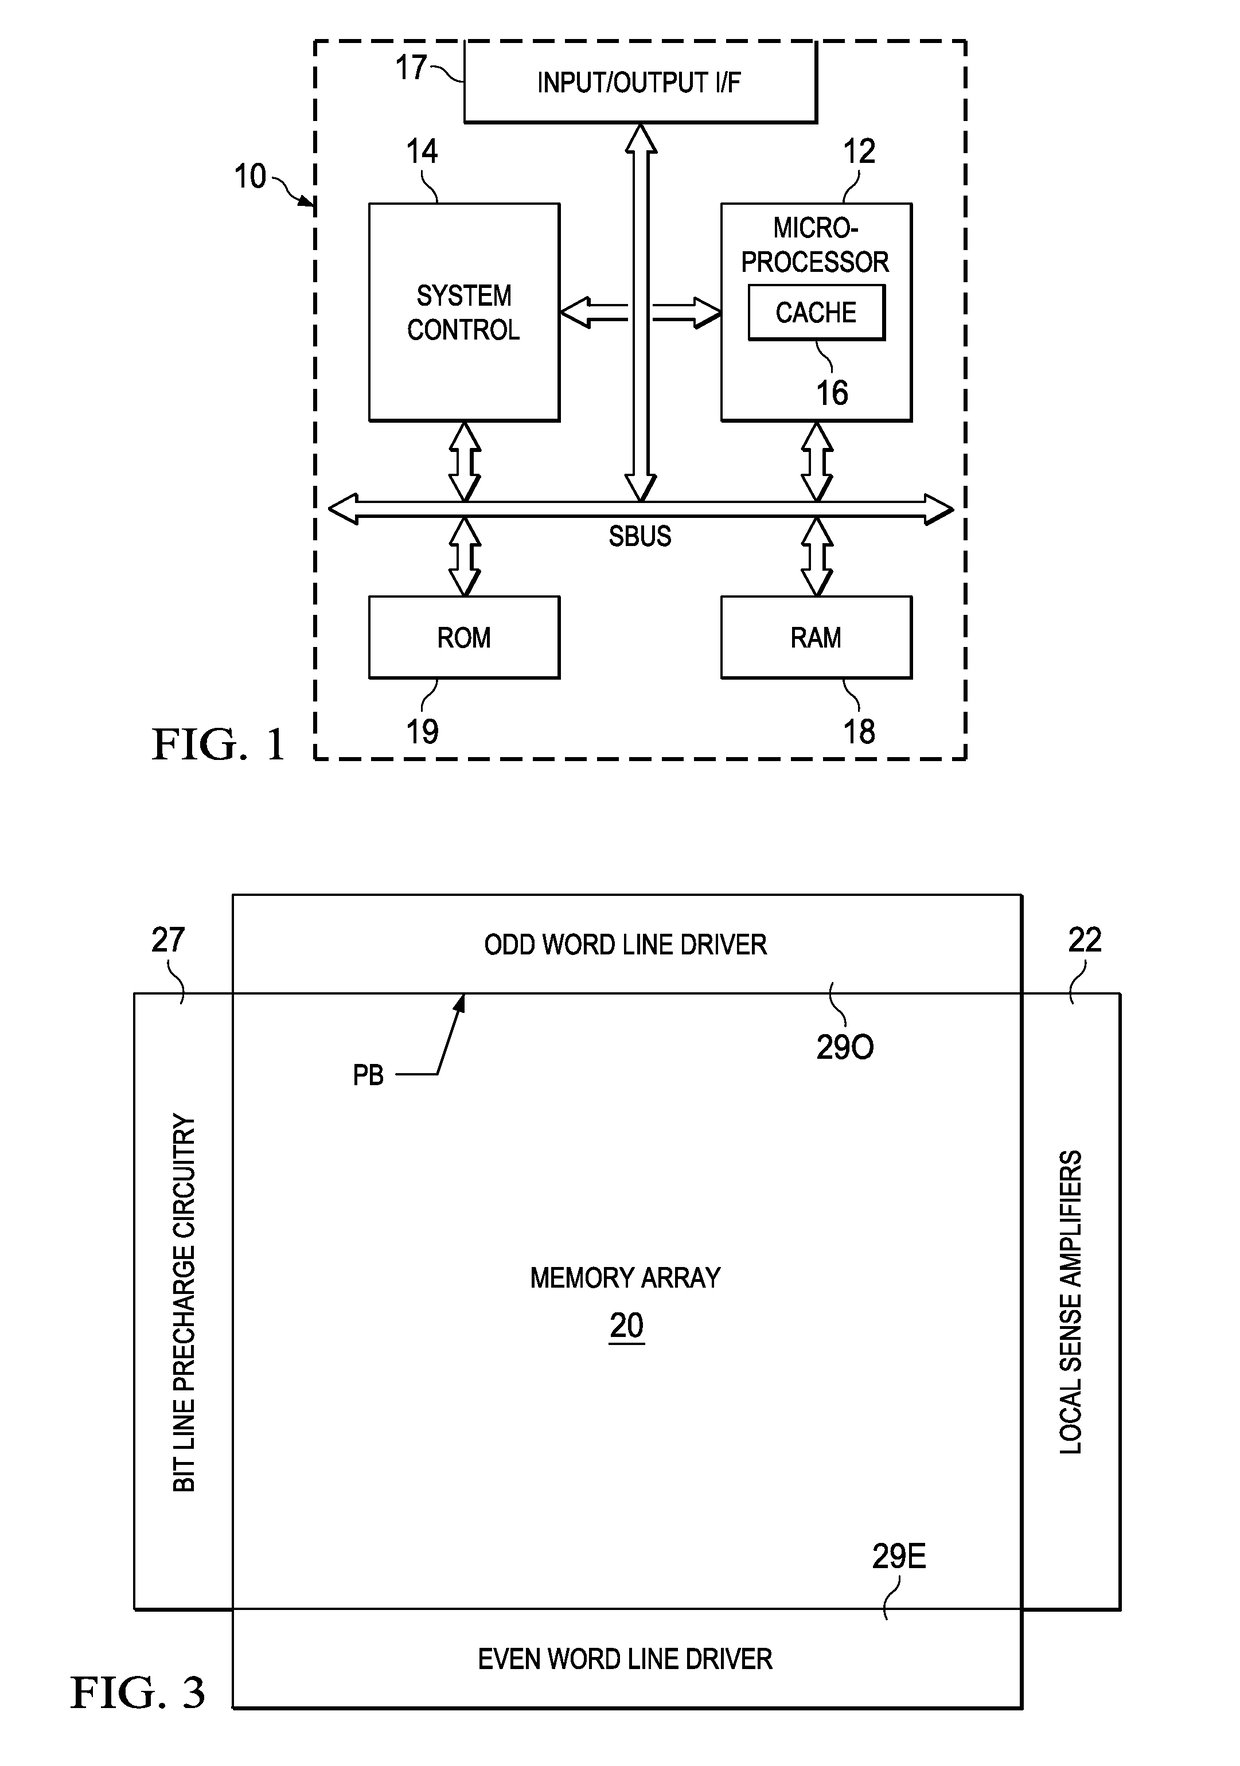 Array-based integrated circuit with reduced proximity effects